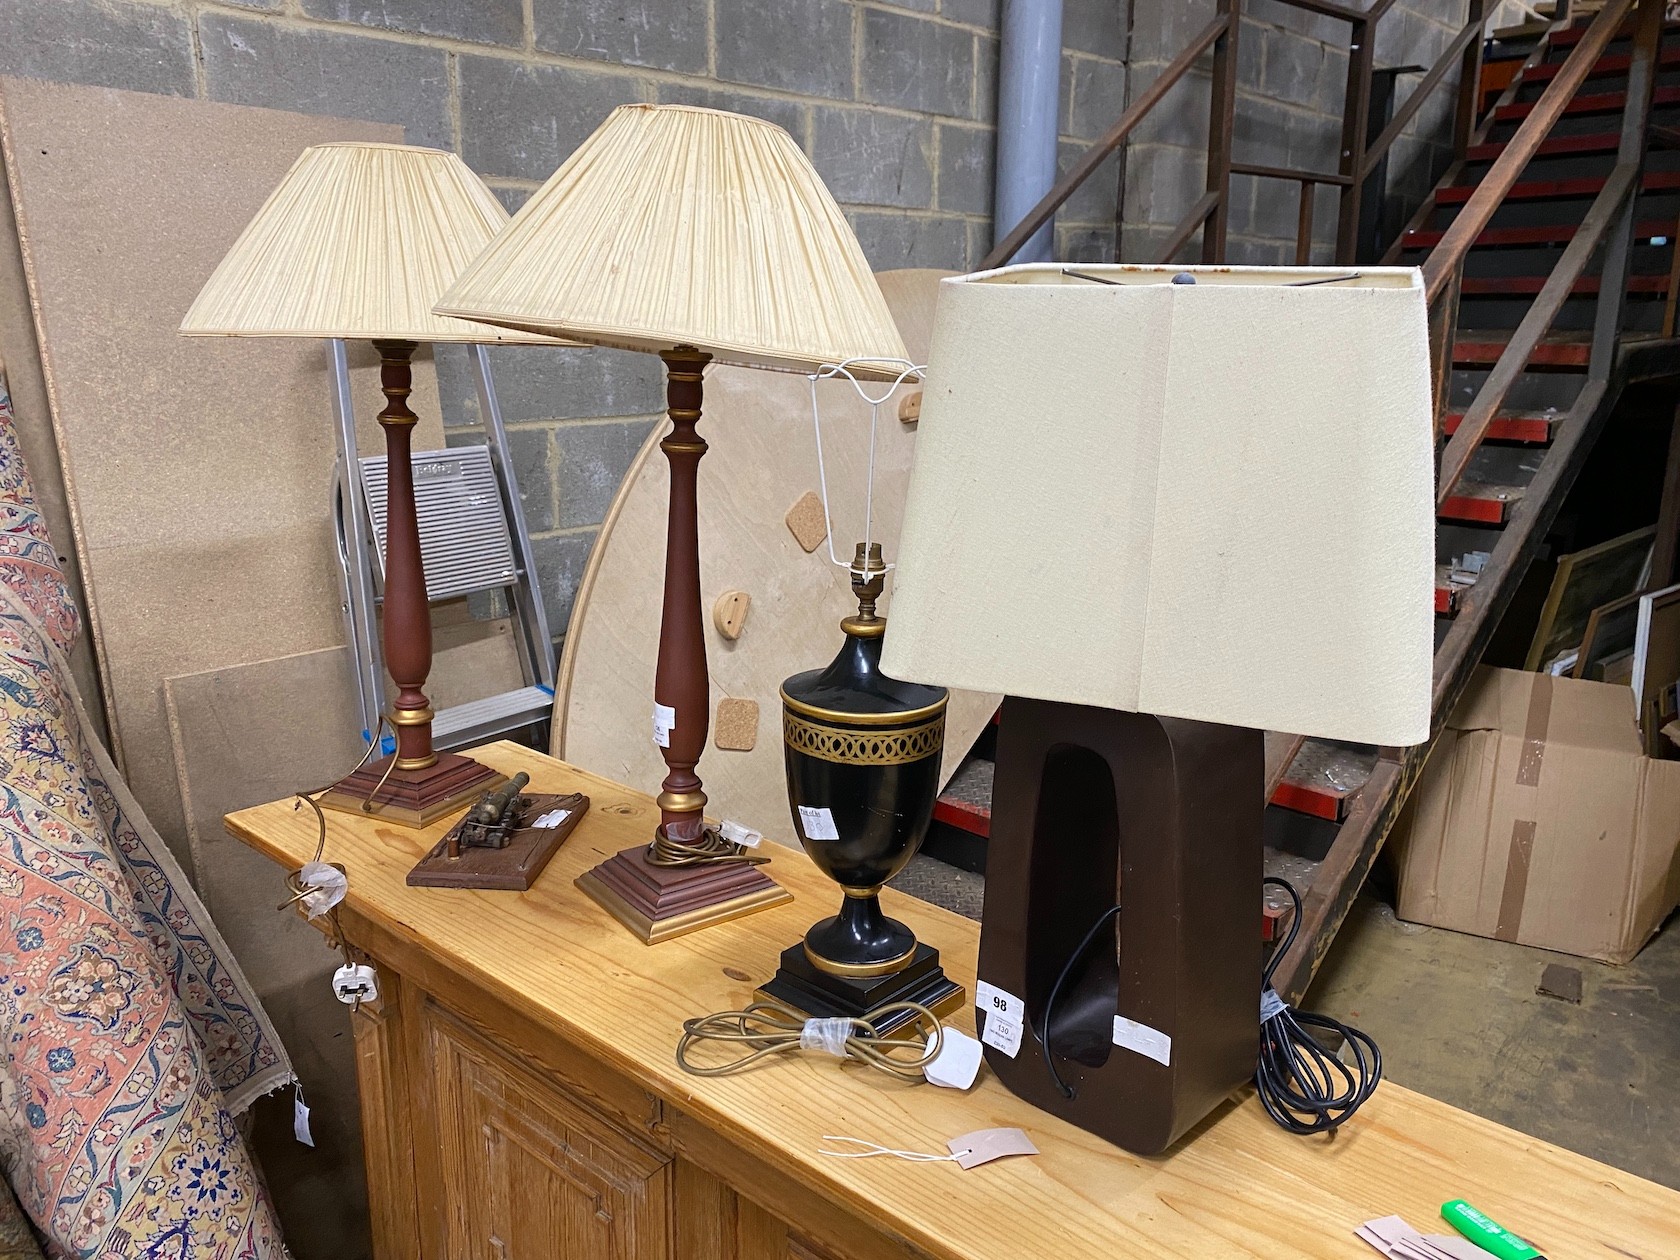 Four modern table lamps and a small brass model cannon